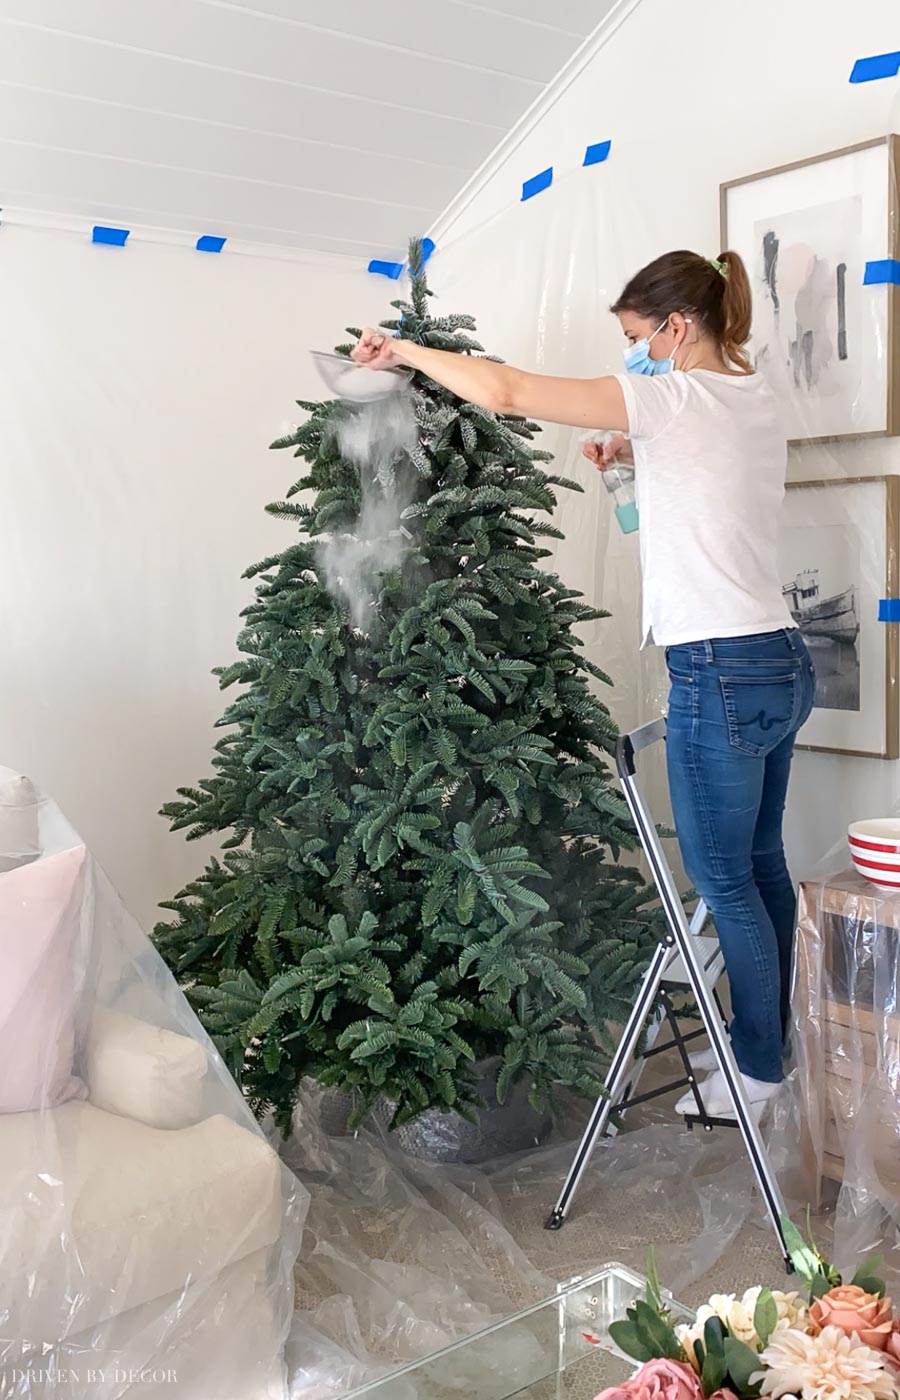 How to Flock a Christmas Tree Step by Step! - Driven by Decor